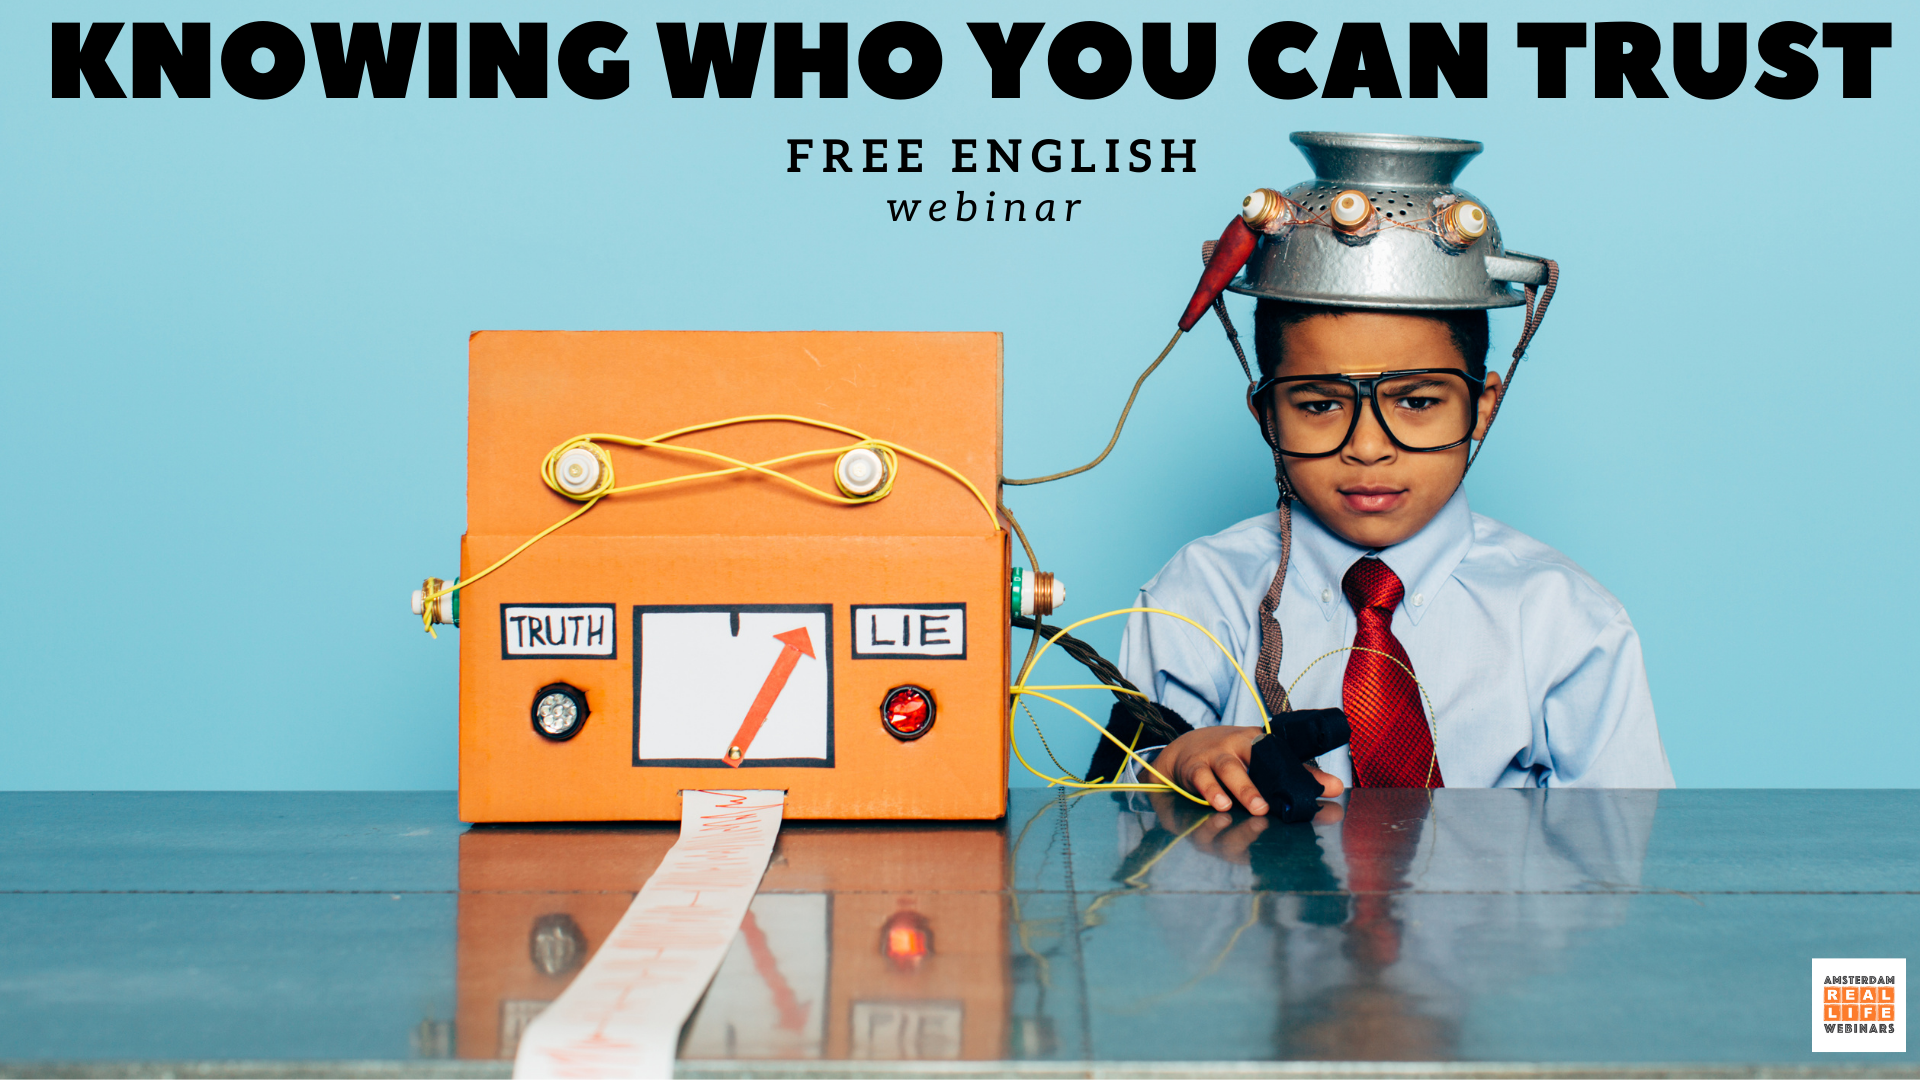 Watch the webinar of knowing who you can trust